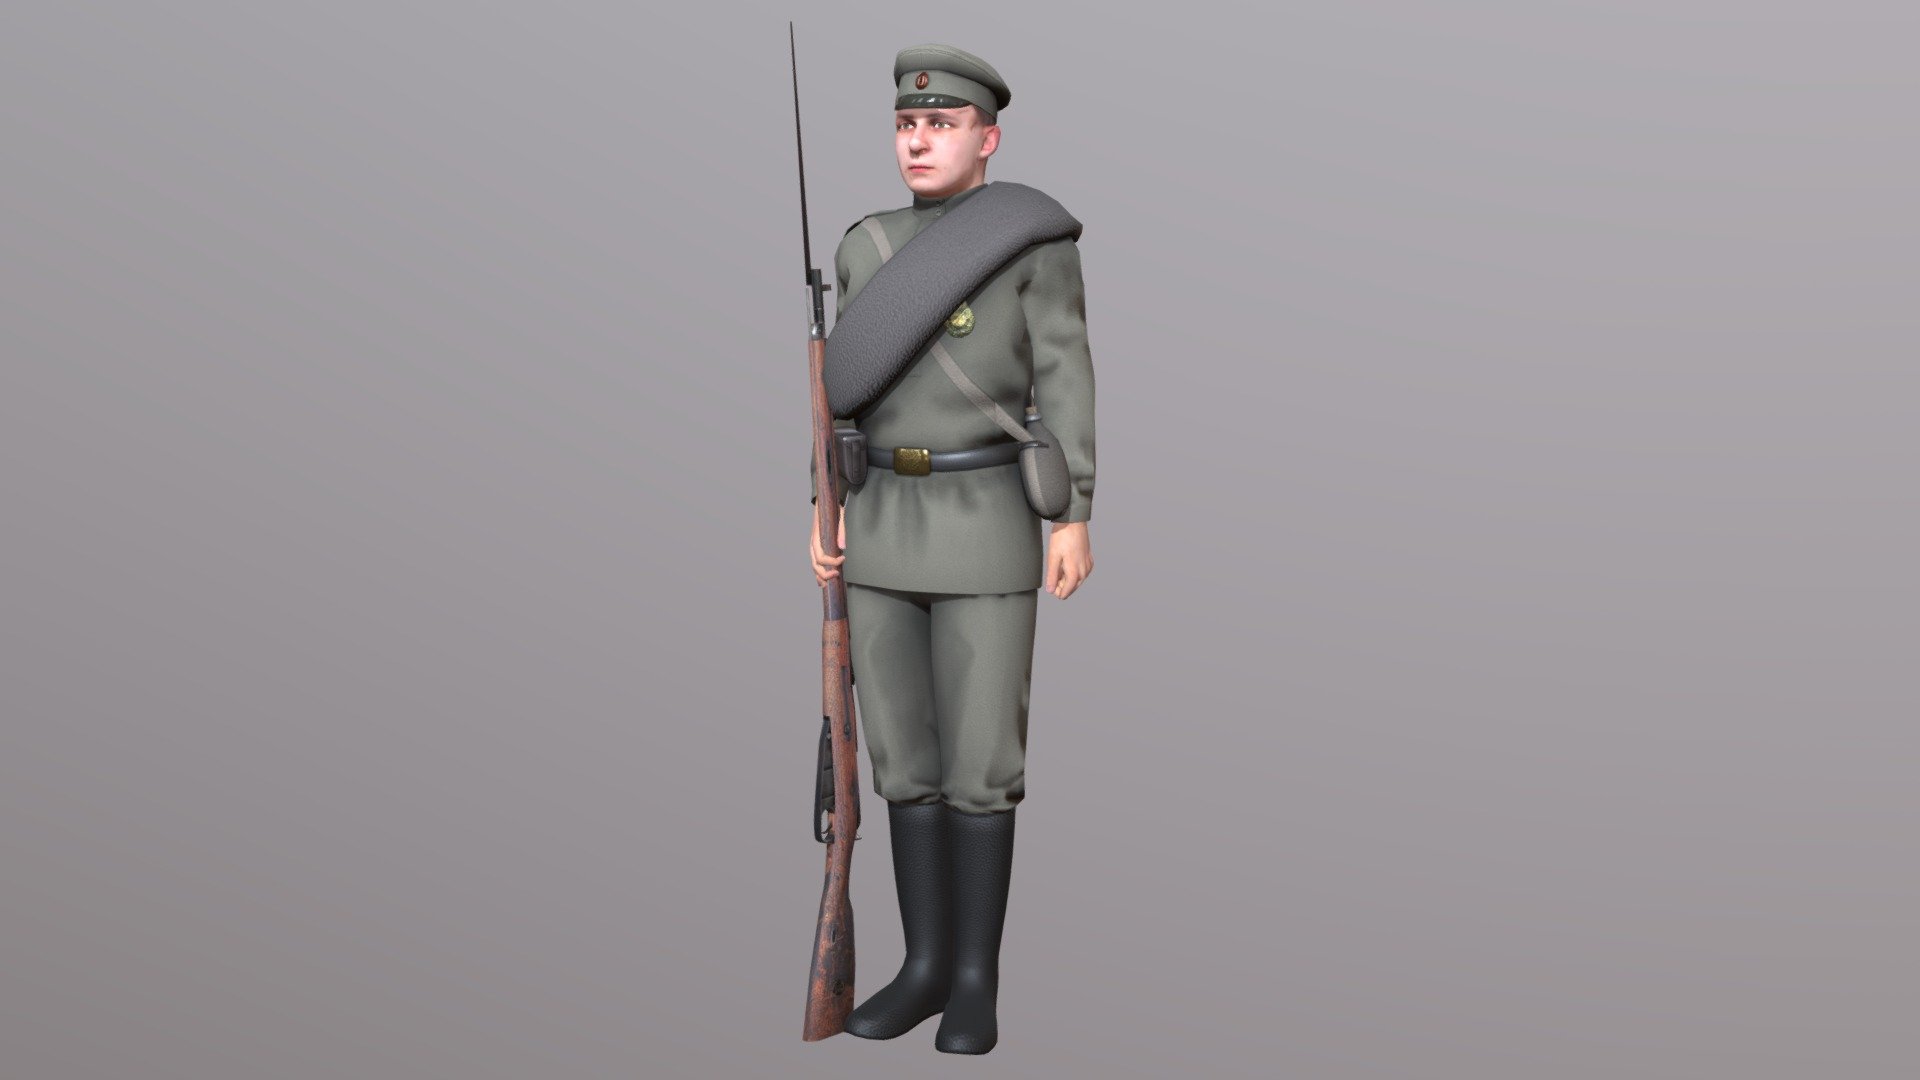 Low poly WW1 russian soldier model, was made for a scene where it was seen from a distance as a large crowd. Normal map and AO were baked from a high poly partially made in Marvelous Designer 3d model